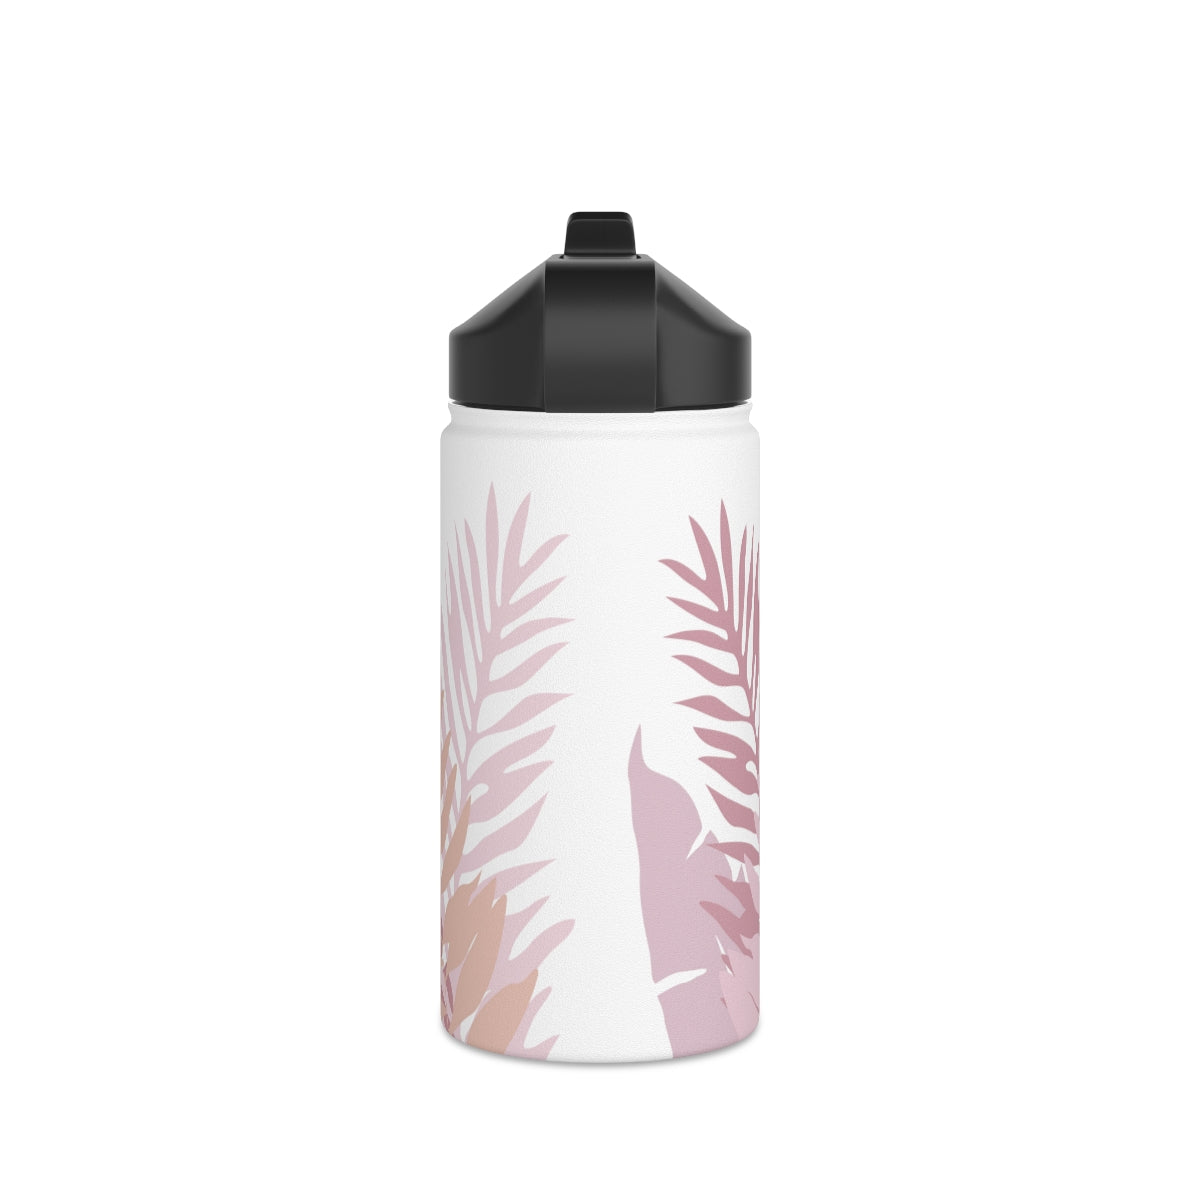 Water Bottle, 3 sizes, Stainless Steel with Sip Straw- Whispering Leaves in Pink